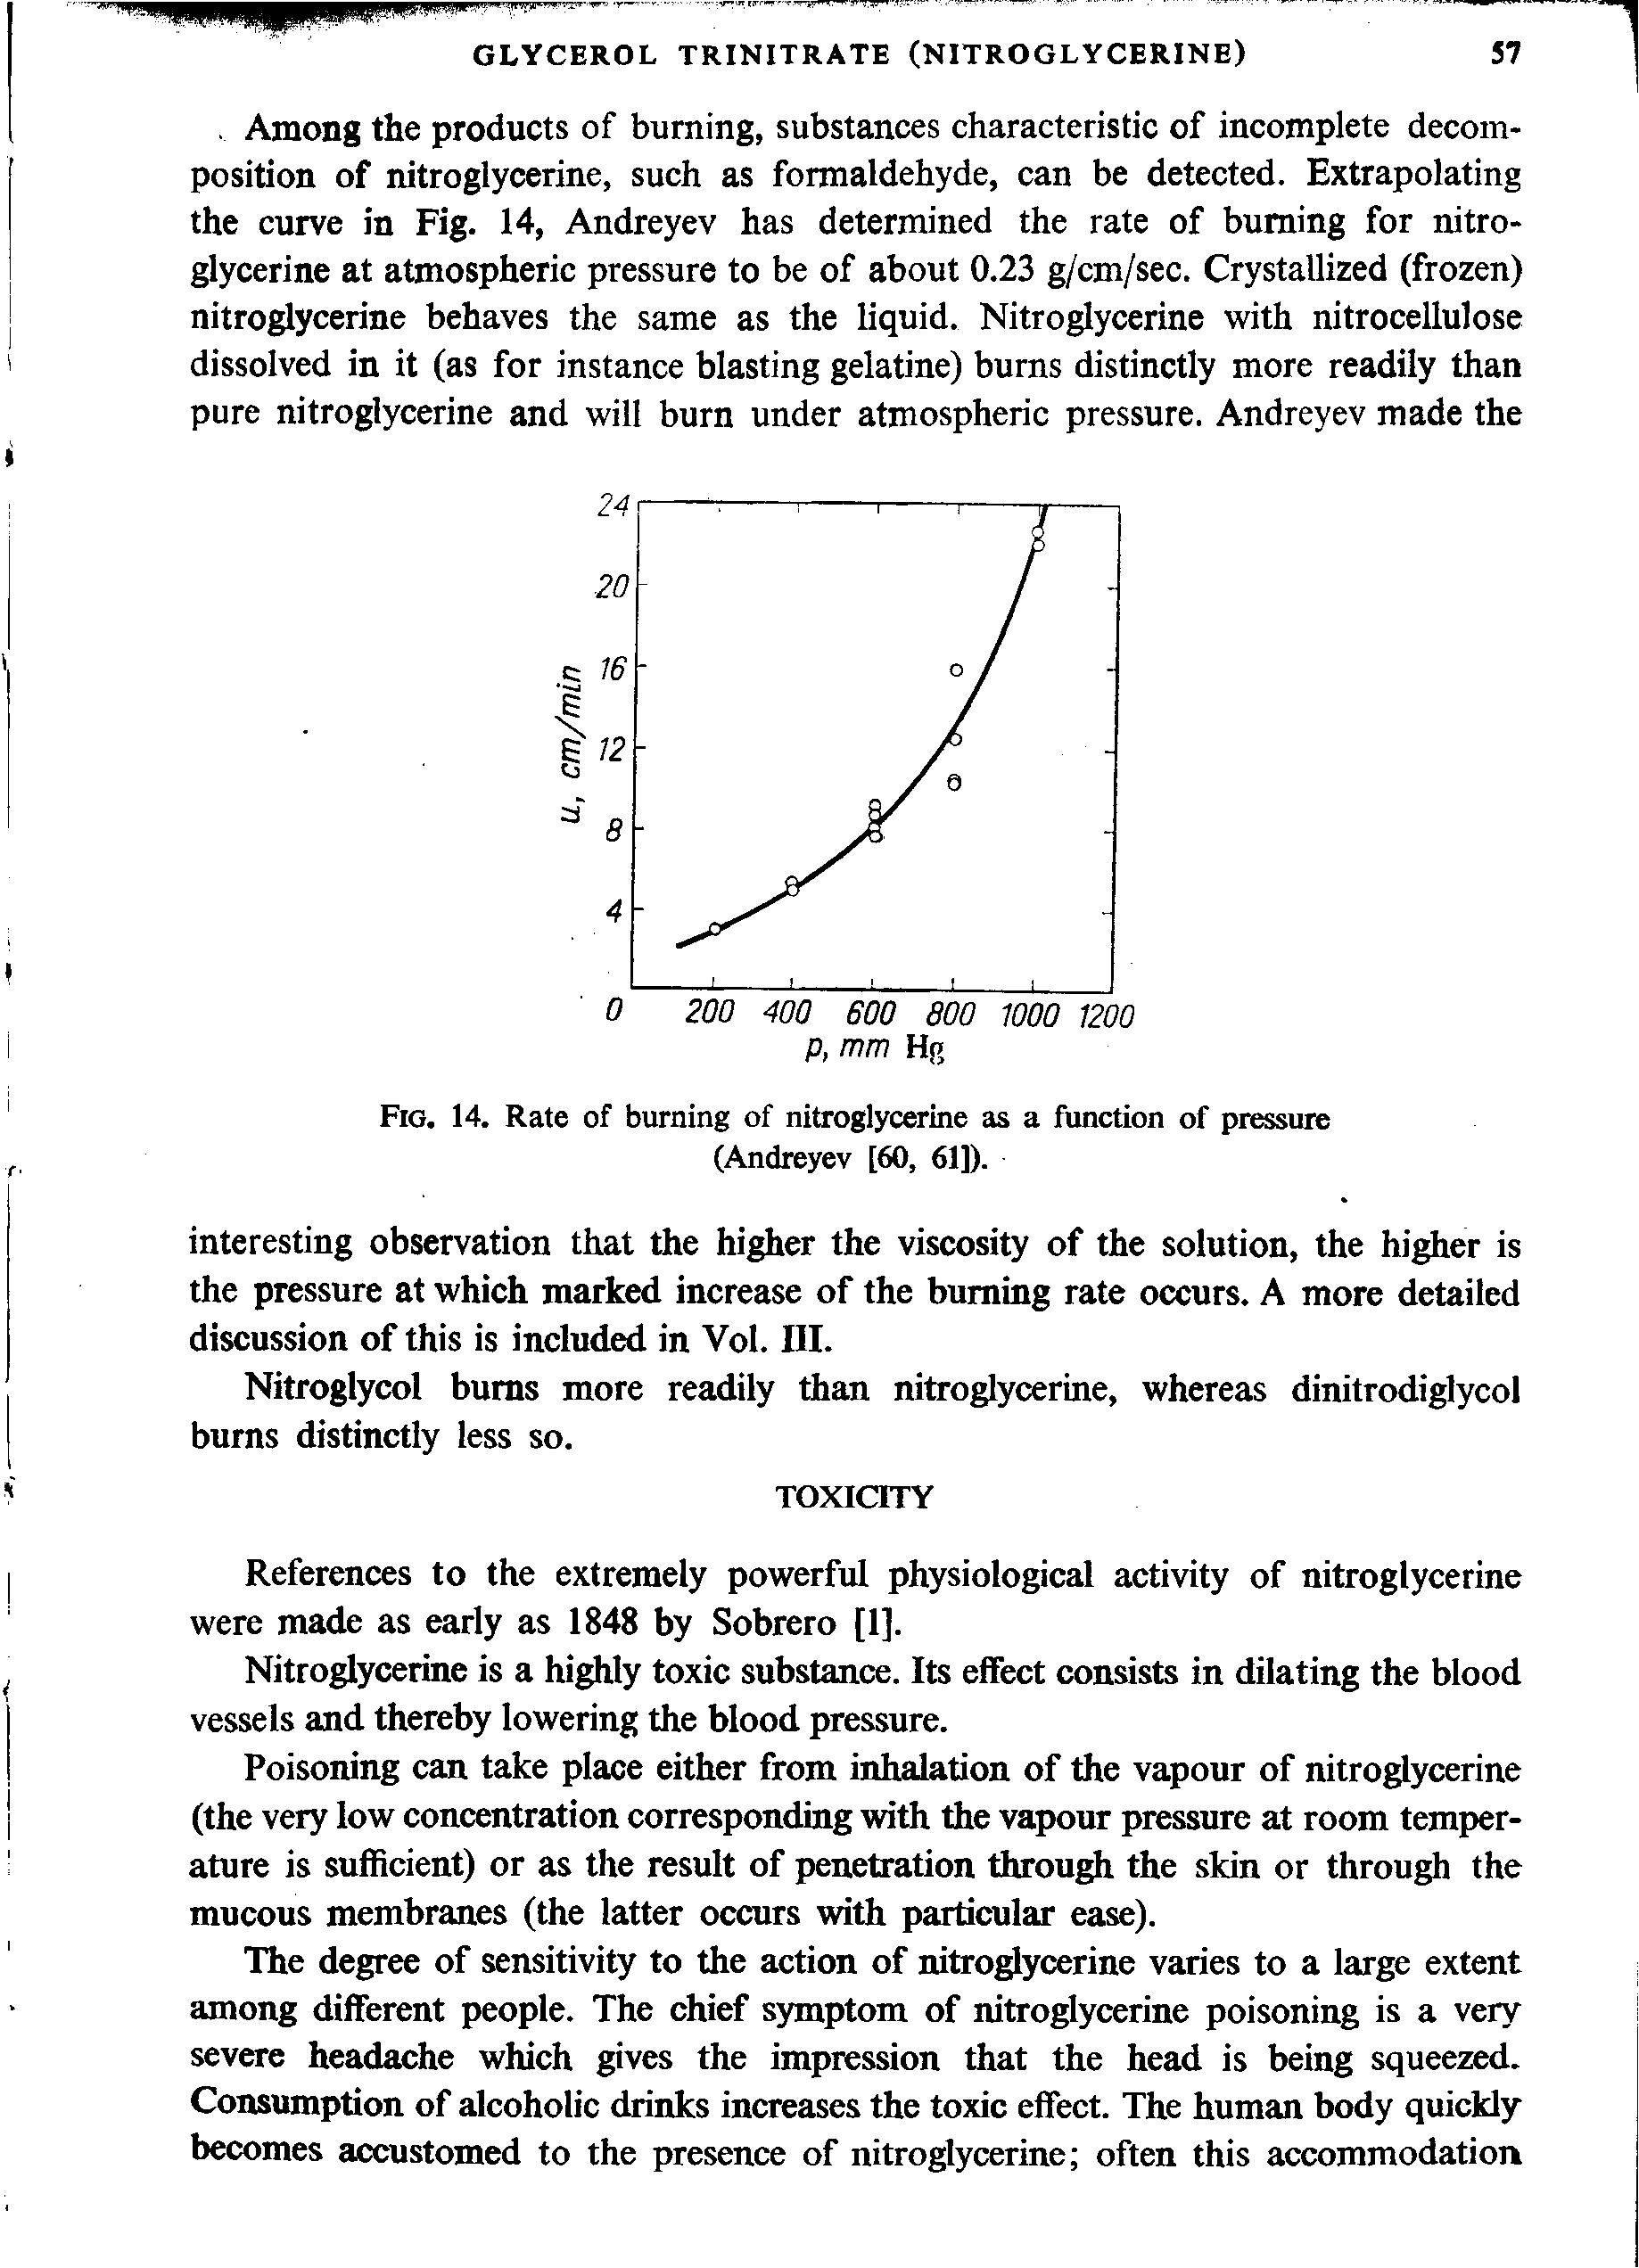 Fig. 14. Rate of burning of nitroglycerine as a function of pressure (Andreyev [60, 61]).